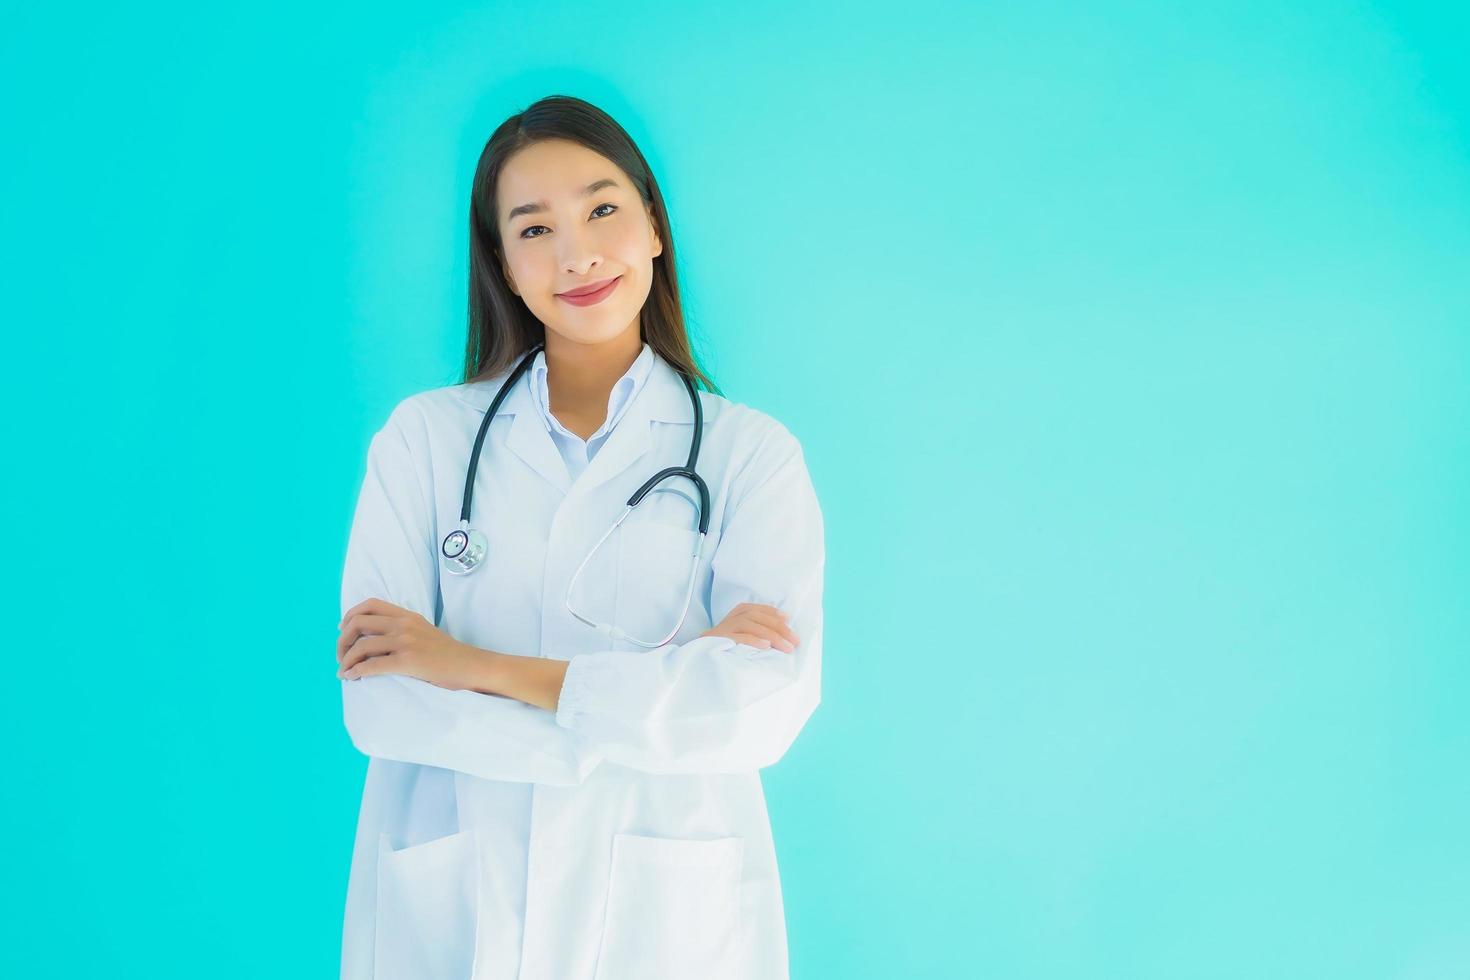 Portrait of a young female Asian doctor with stethoscope photo